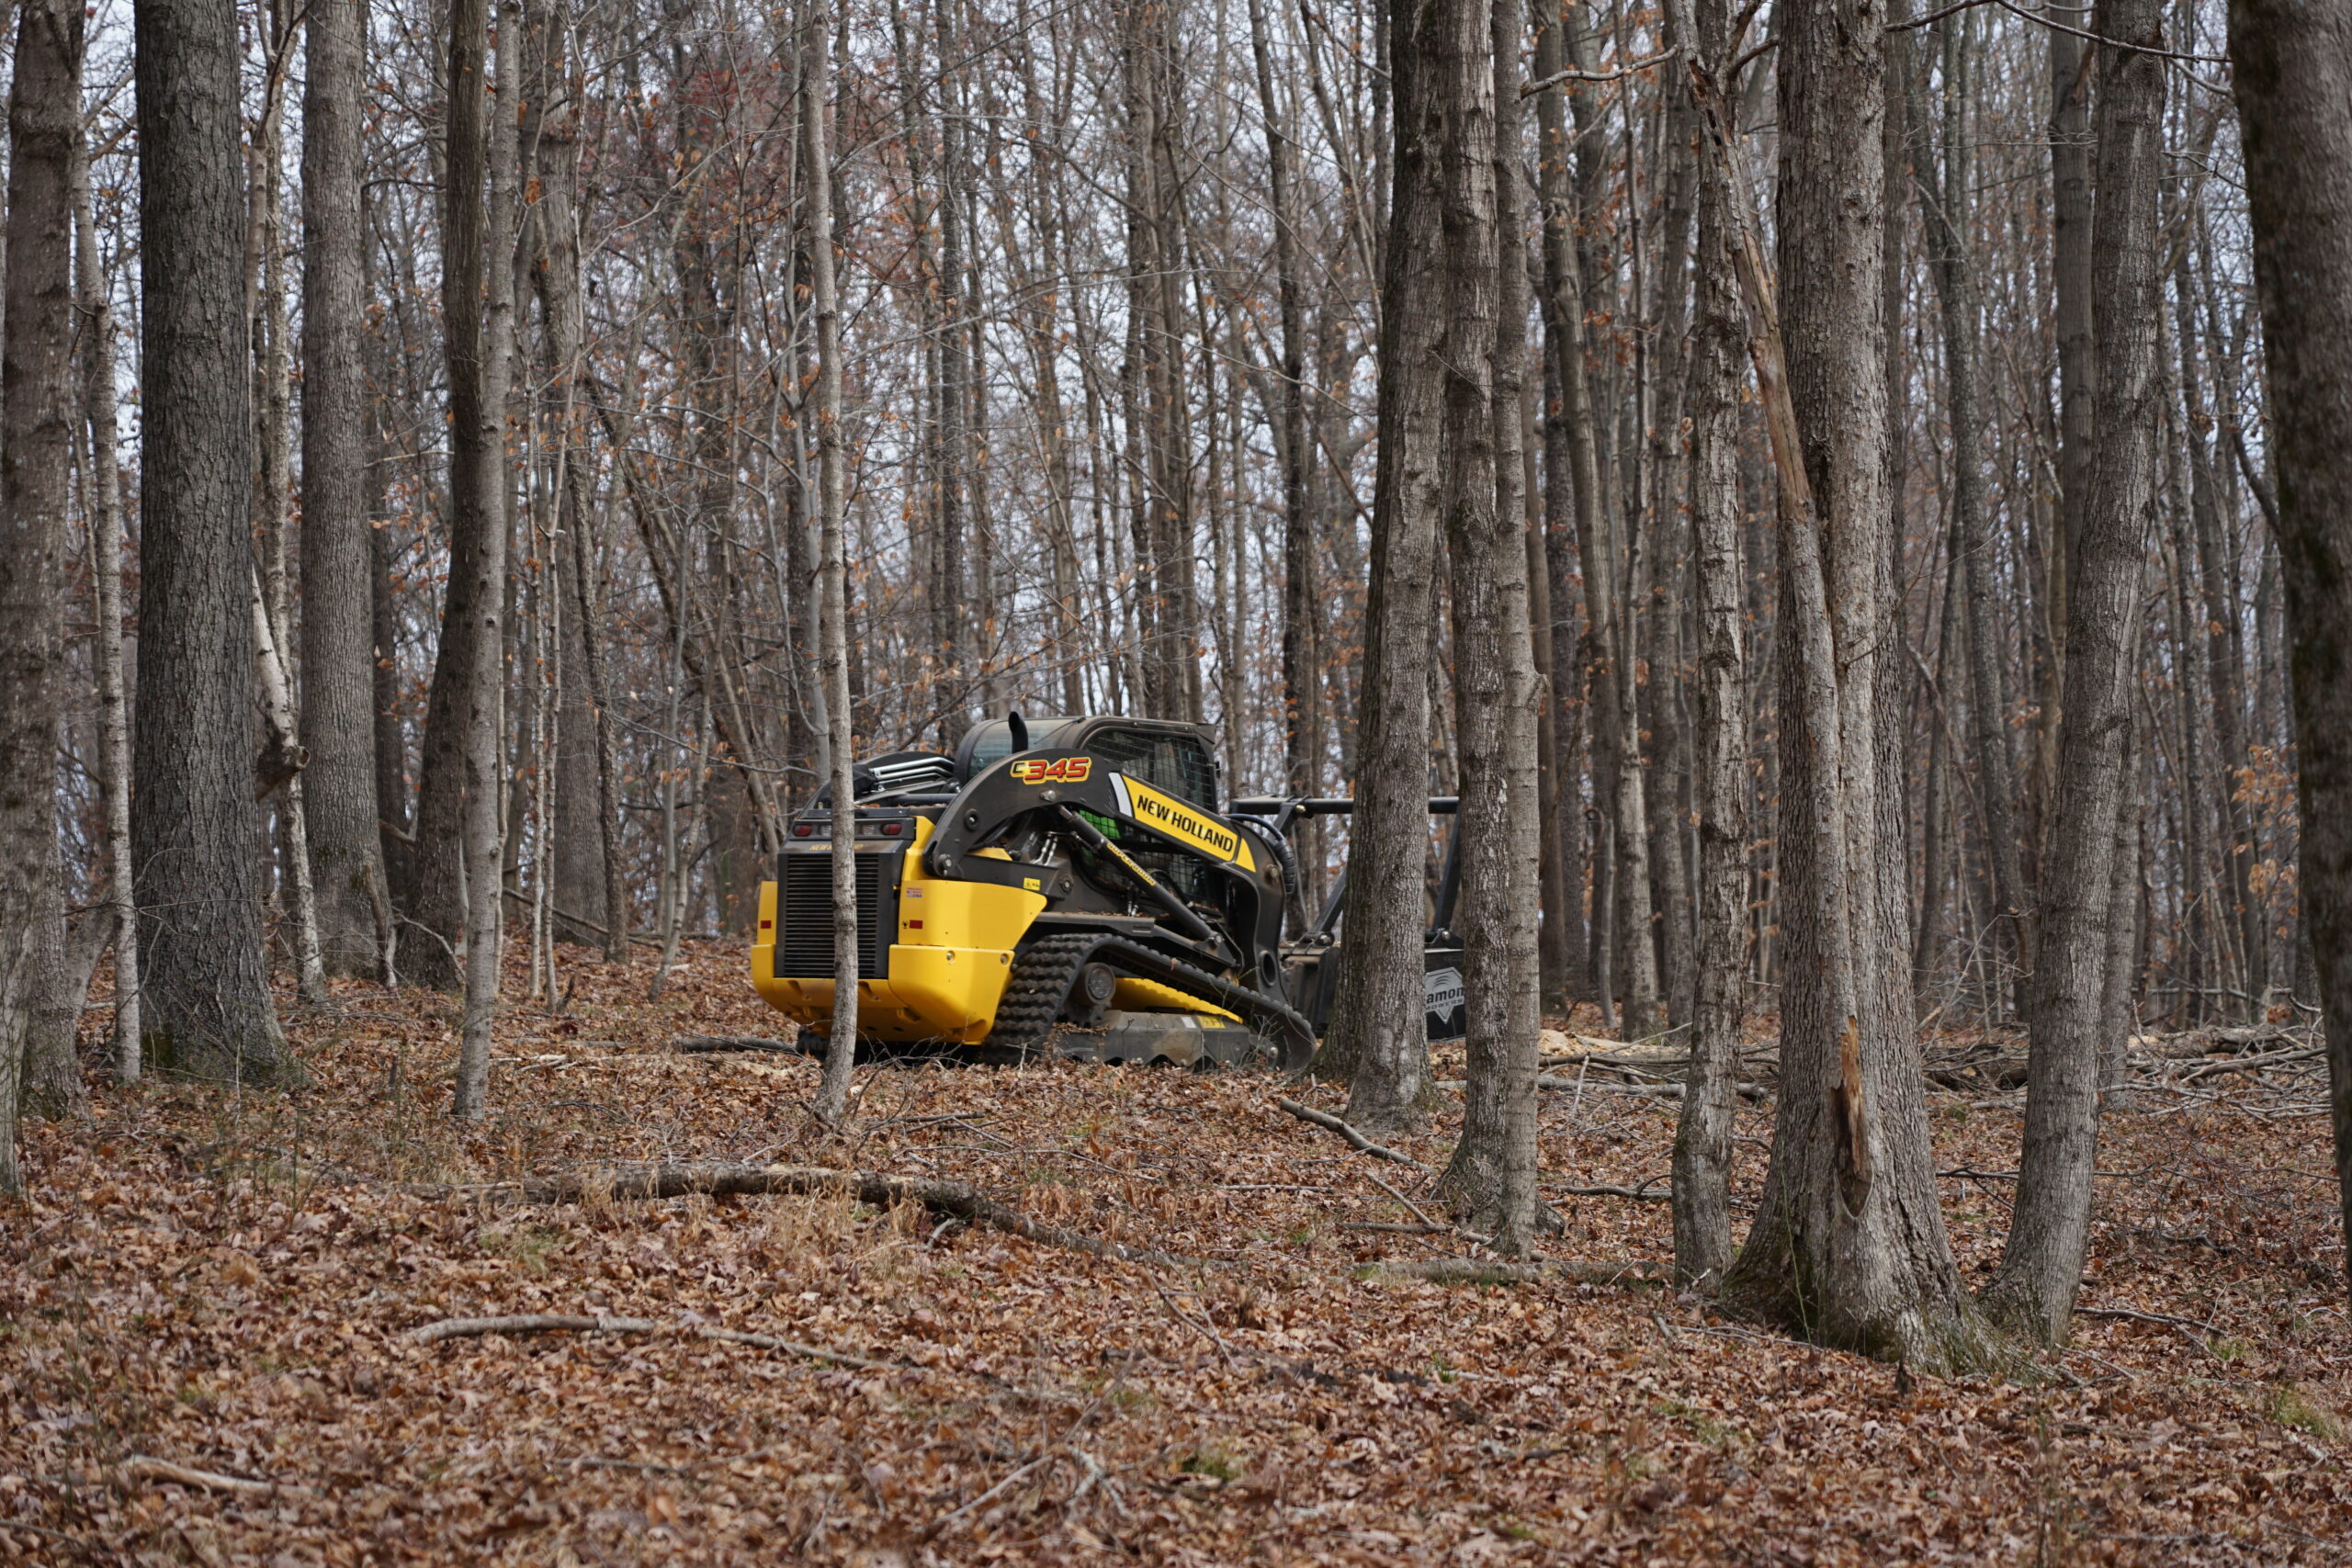 forestry mulcher clearing land vegetation for a trail in a forest.